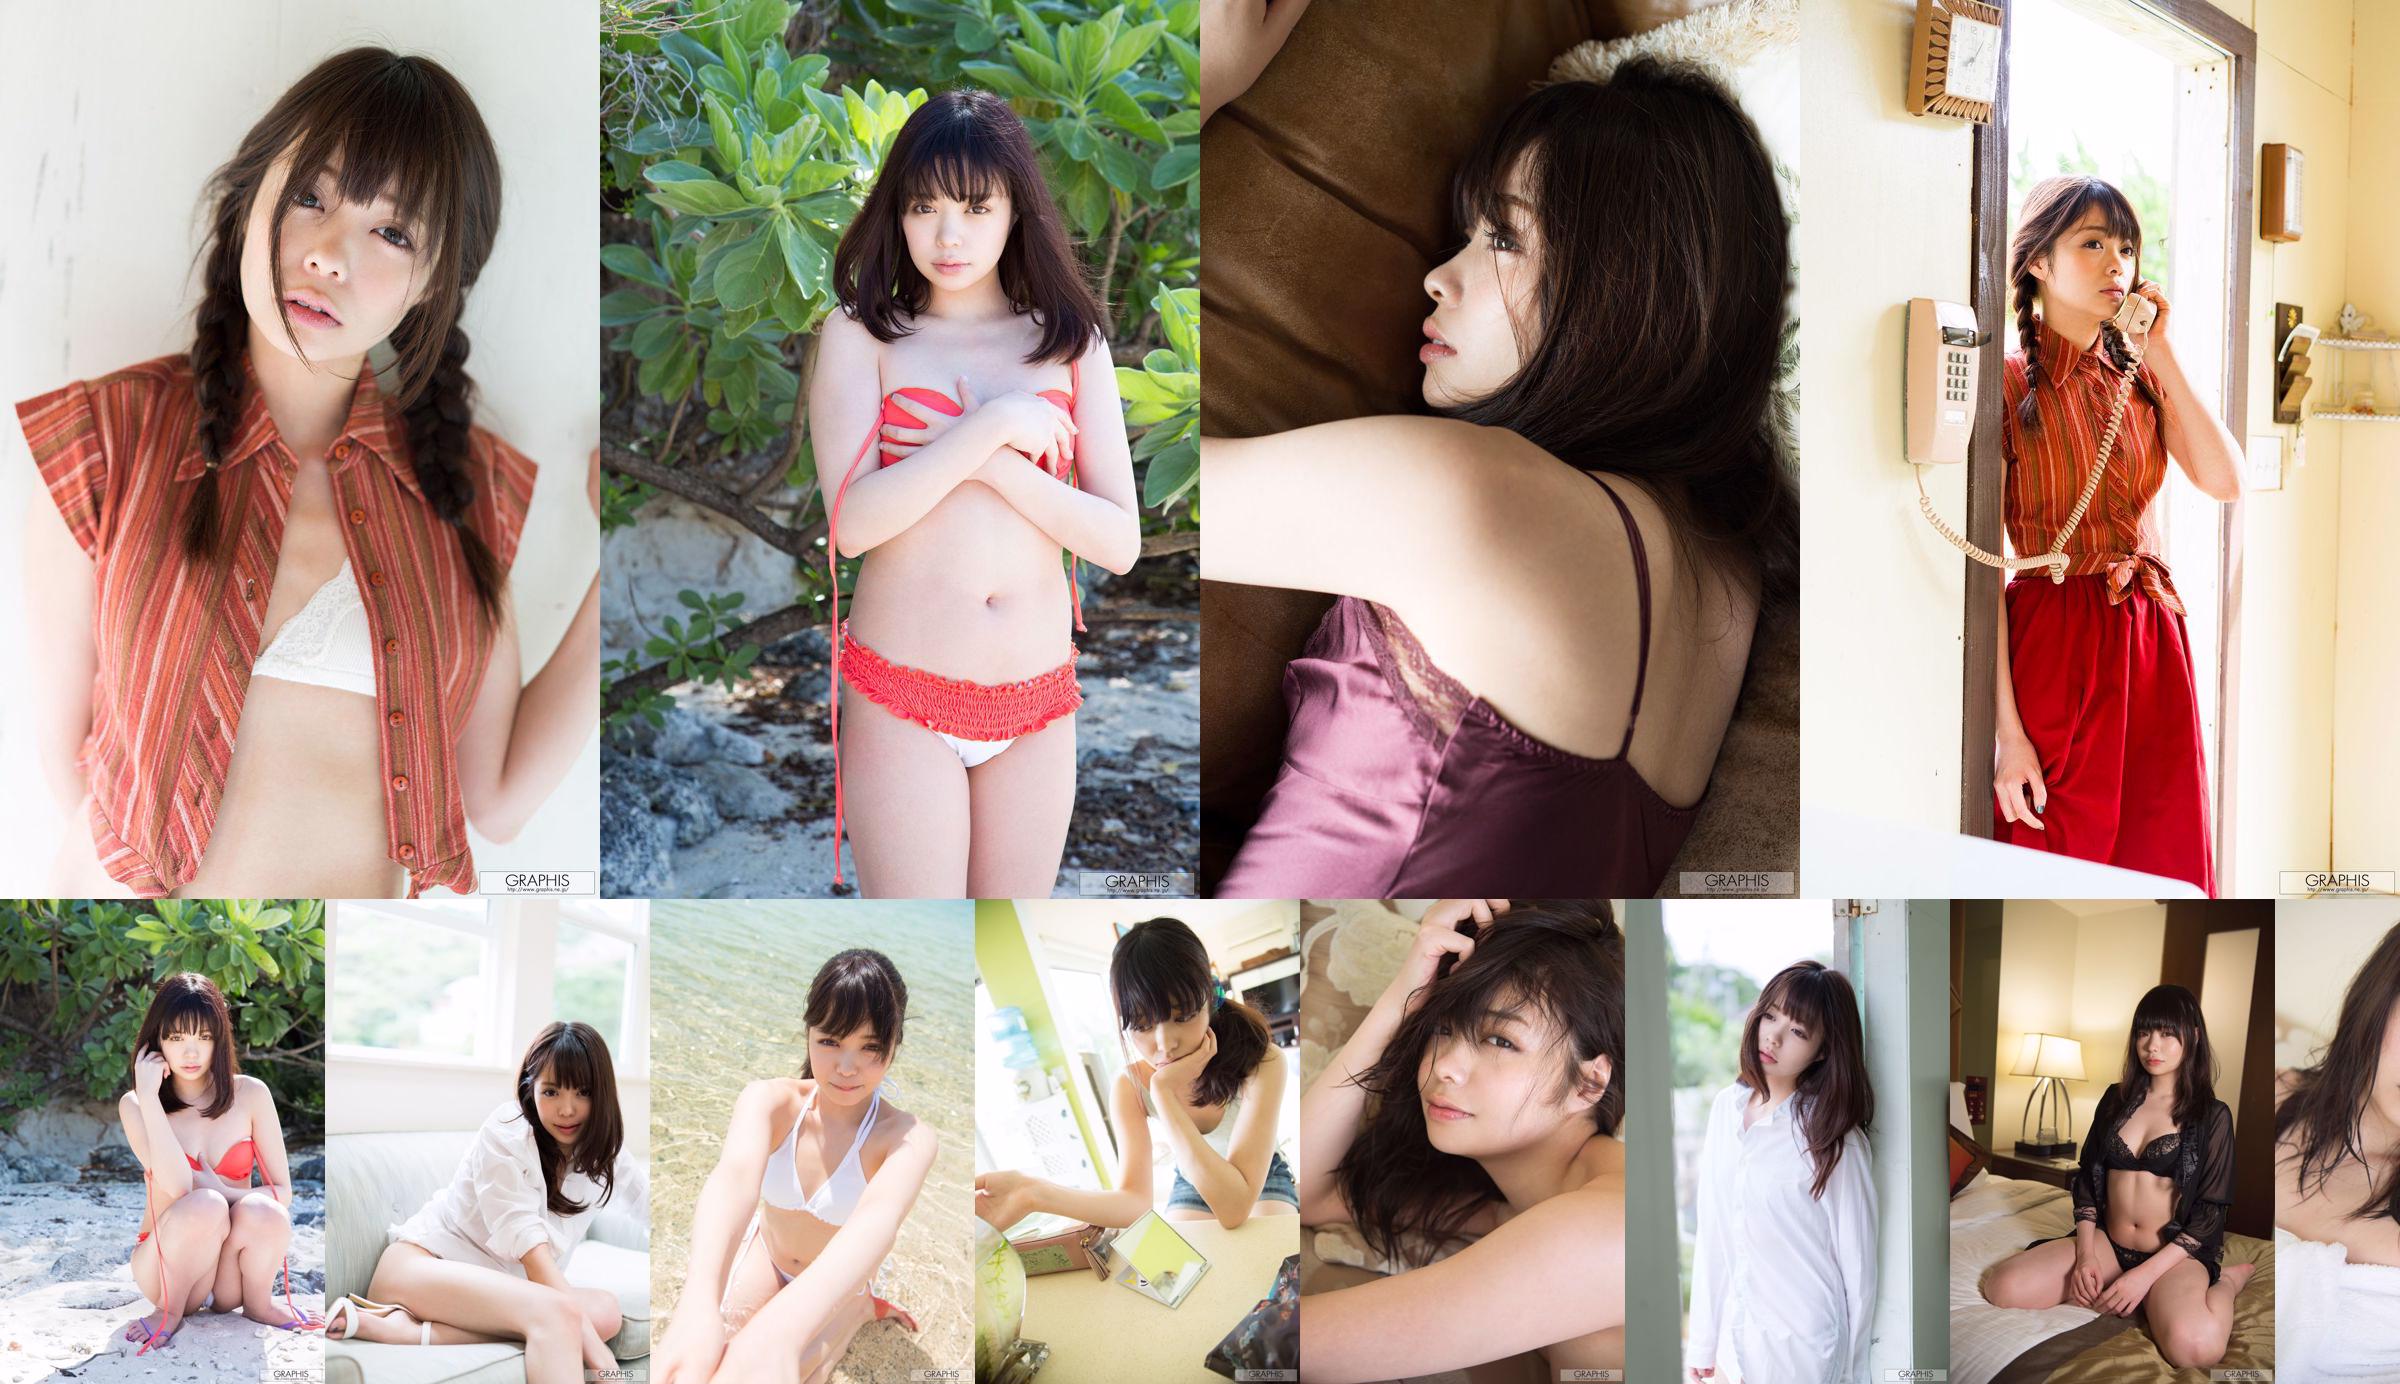 Kaname Ootori Kaname Otori / Kaname Otori [Graphis] First Gravure First Gravure No.ae266e Page 1